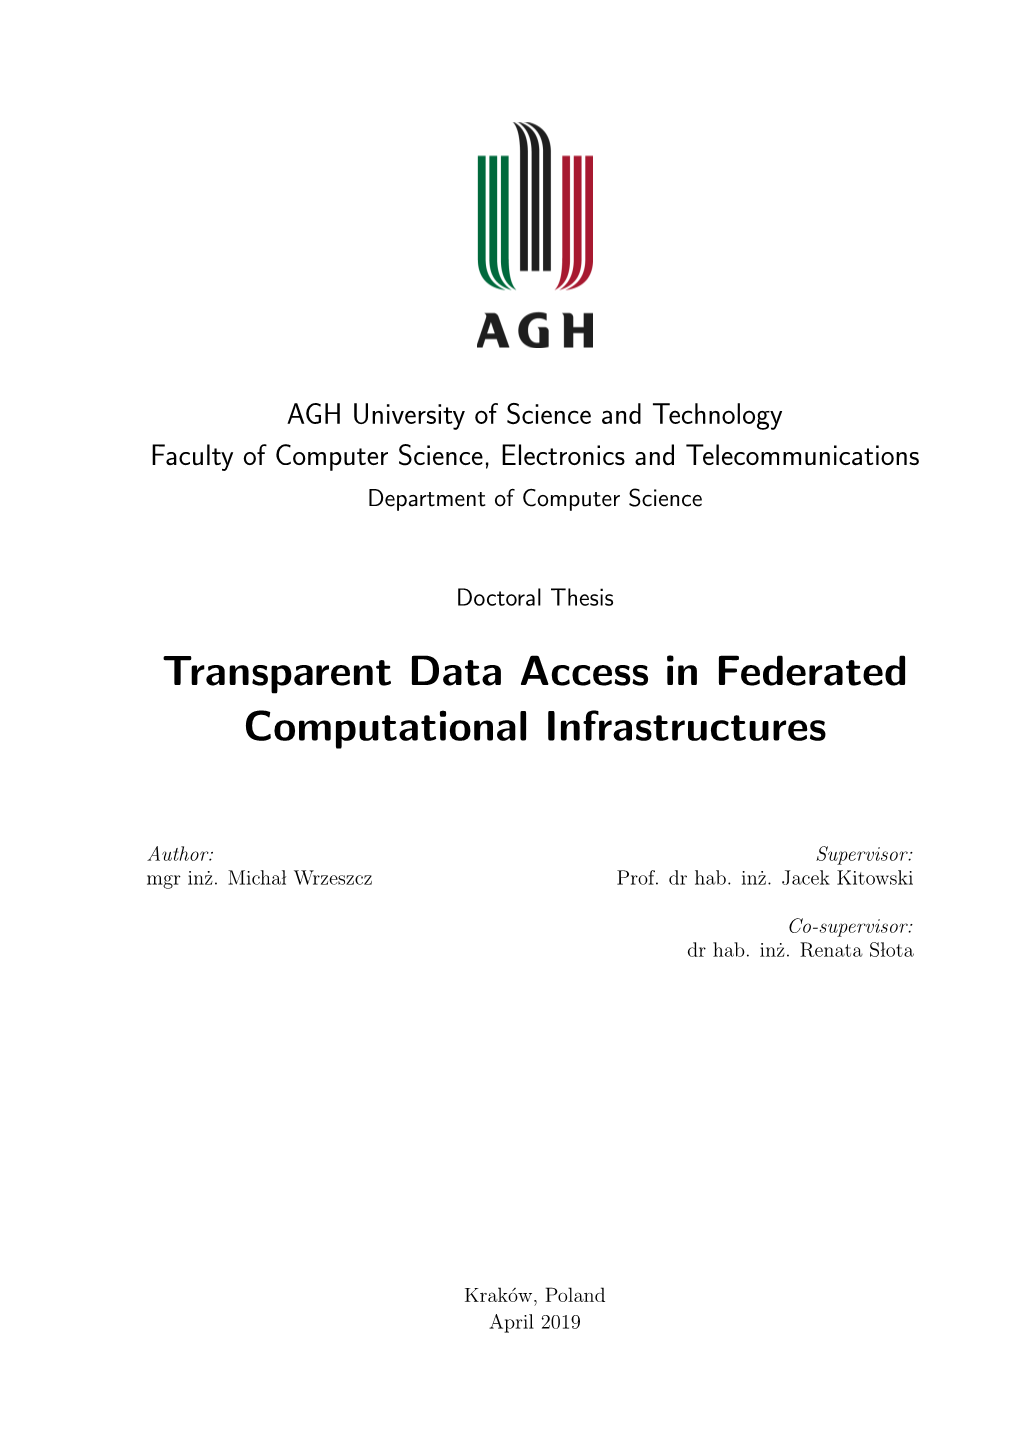 Transparent Data Access in Federated Computational Infrastructures